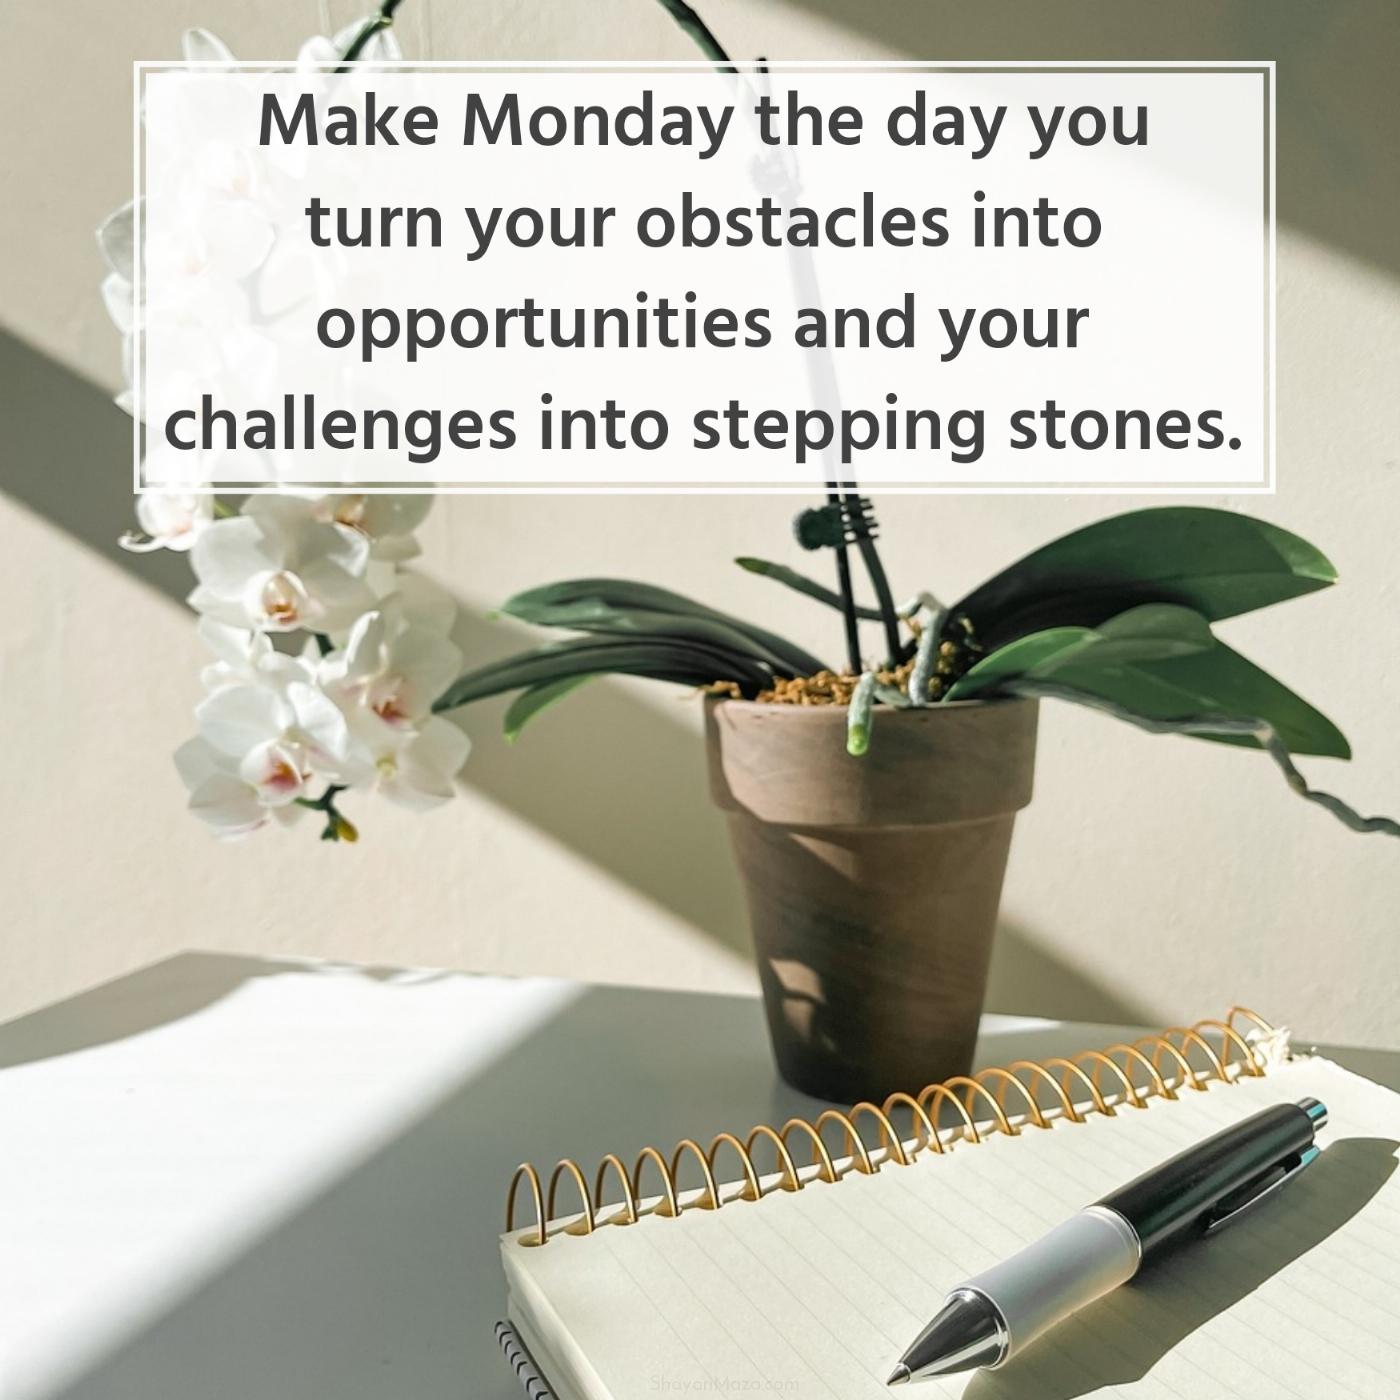 Make Monday the day you turn your obstacles into opportunities